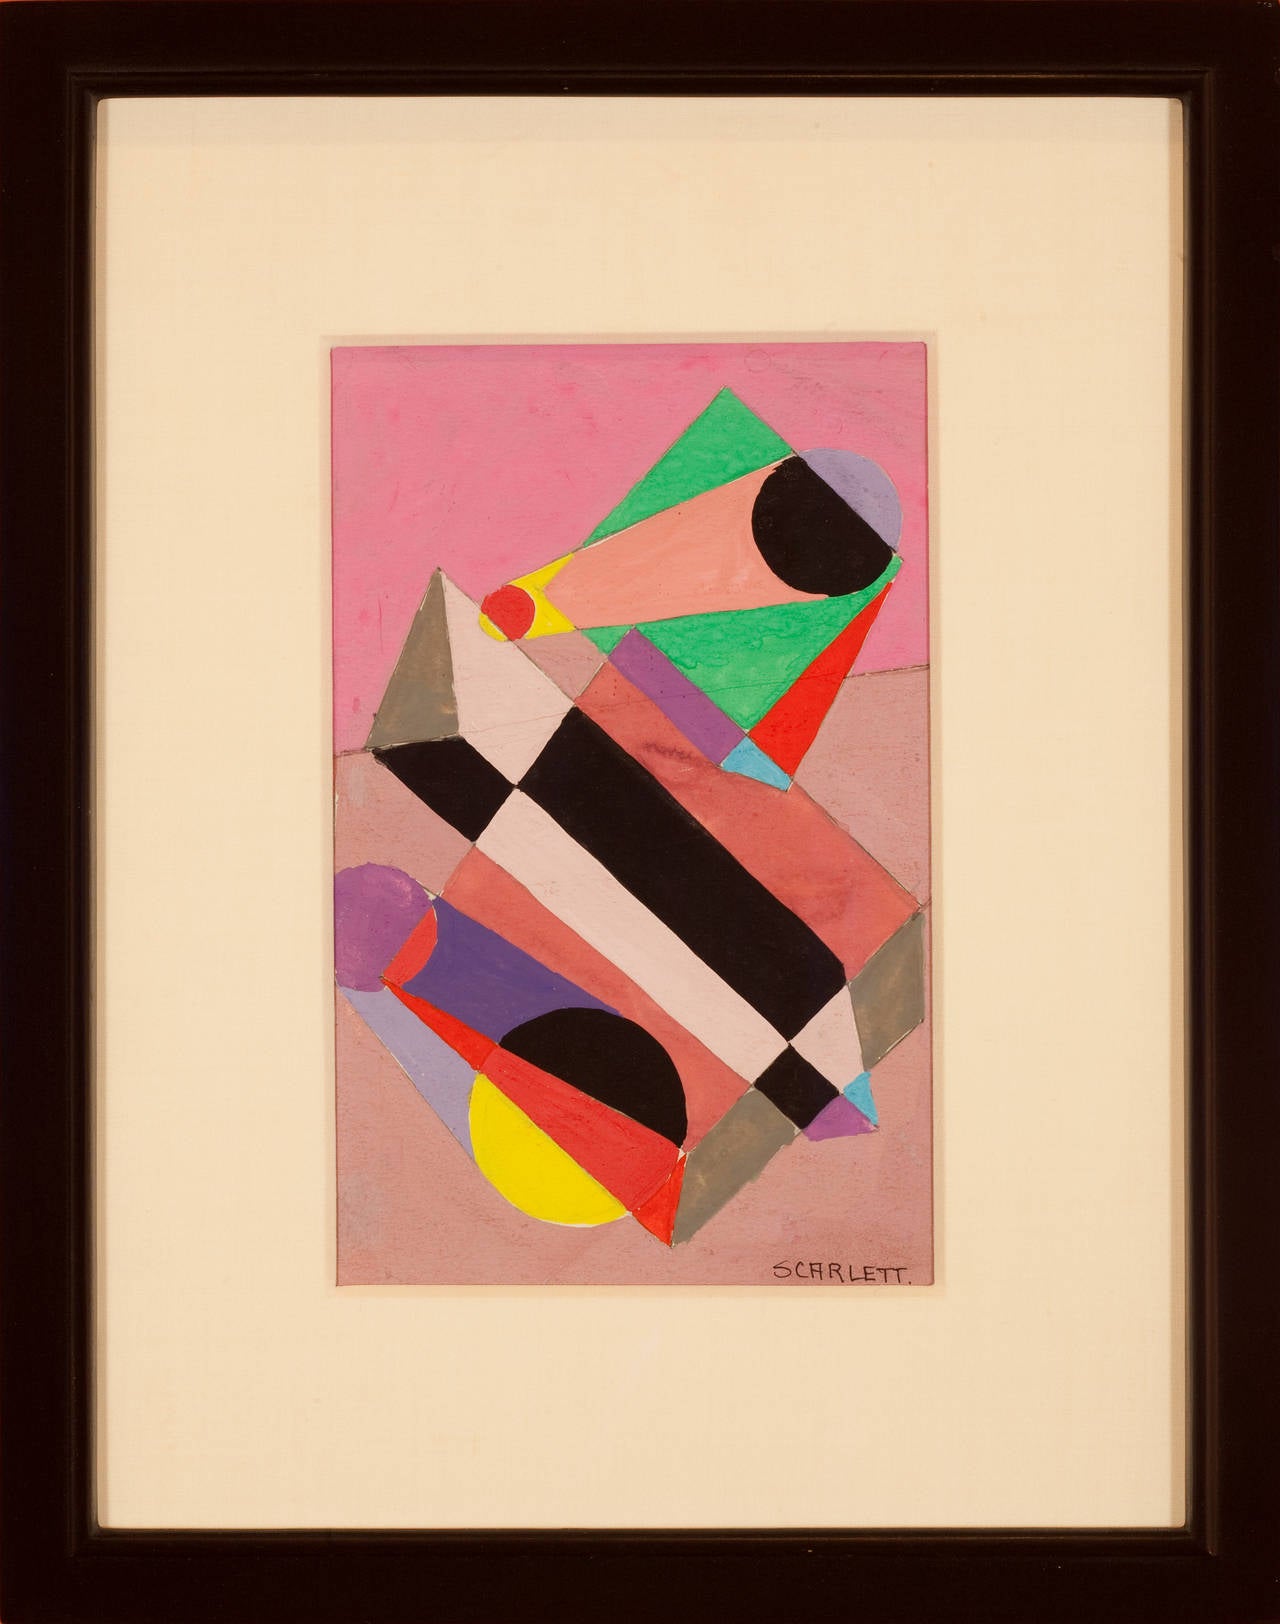 Rolph Scarlett Abstract Painting - "Study in Pink and Black"